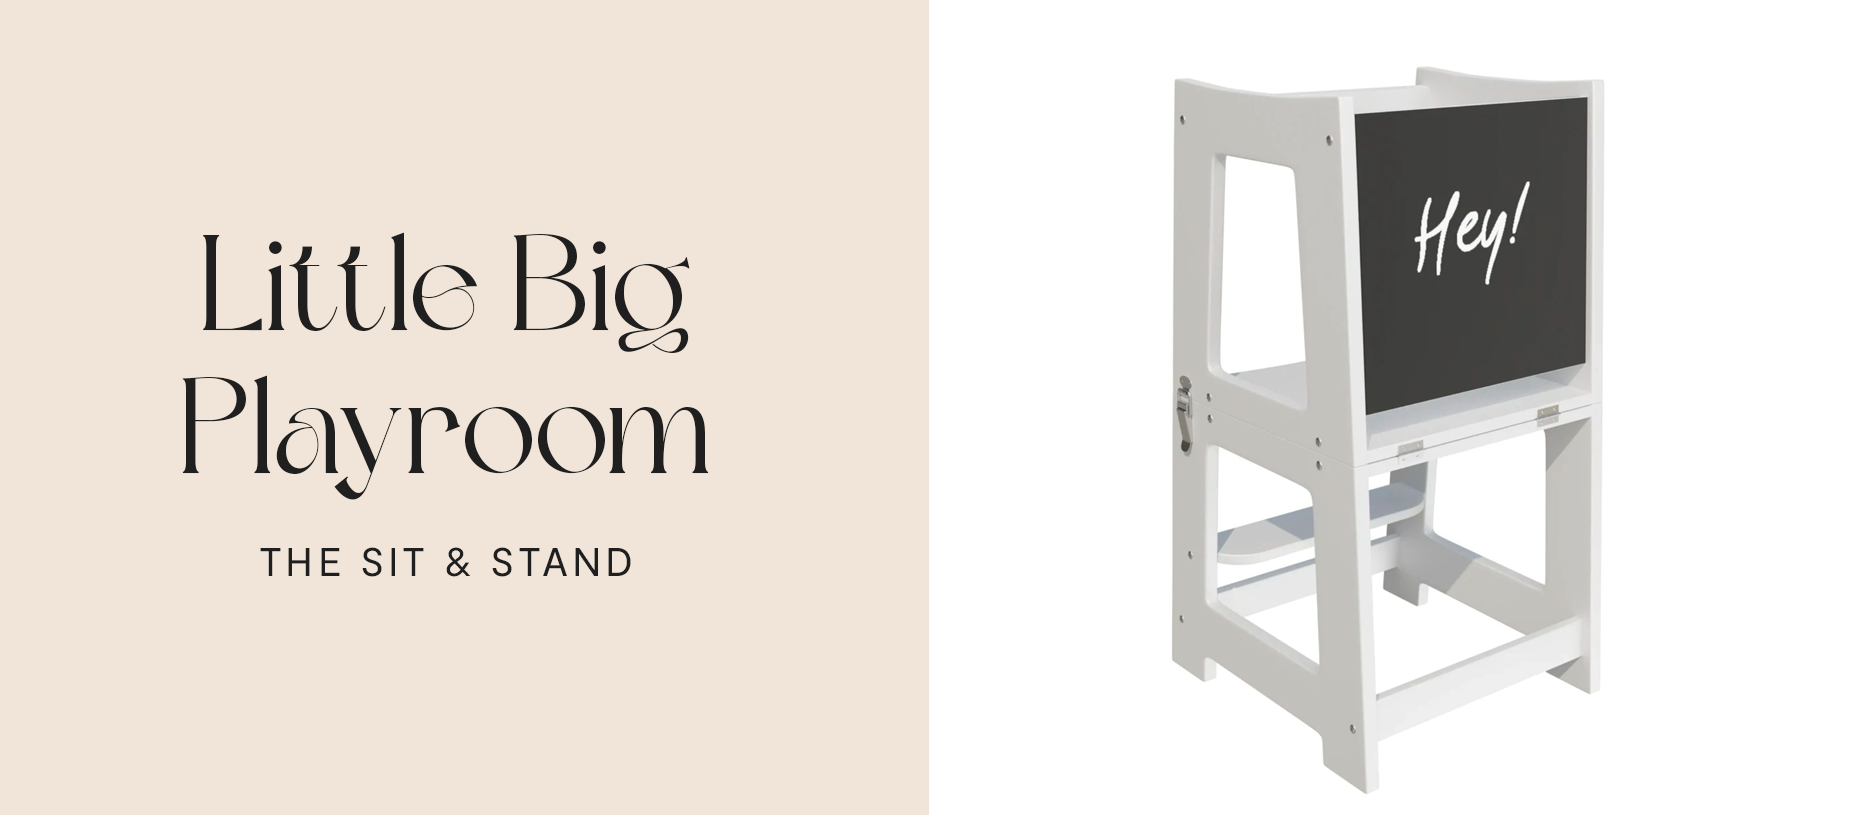 Little Big Playroom - The Sit & Stand